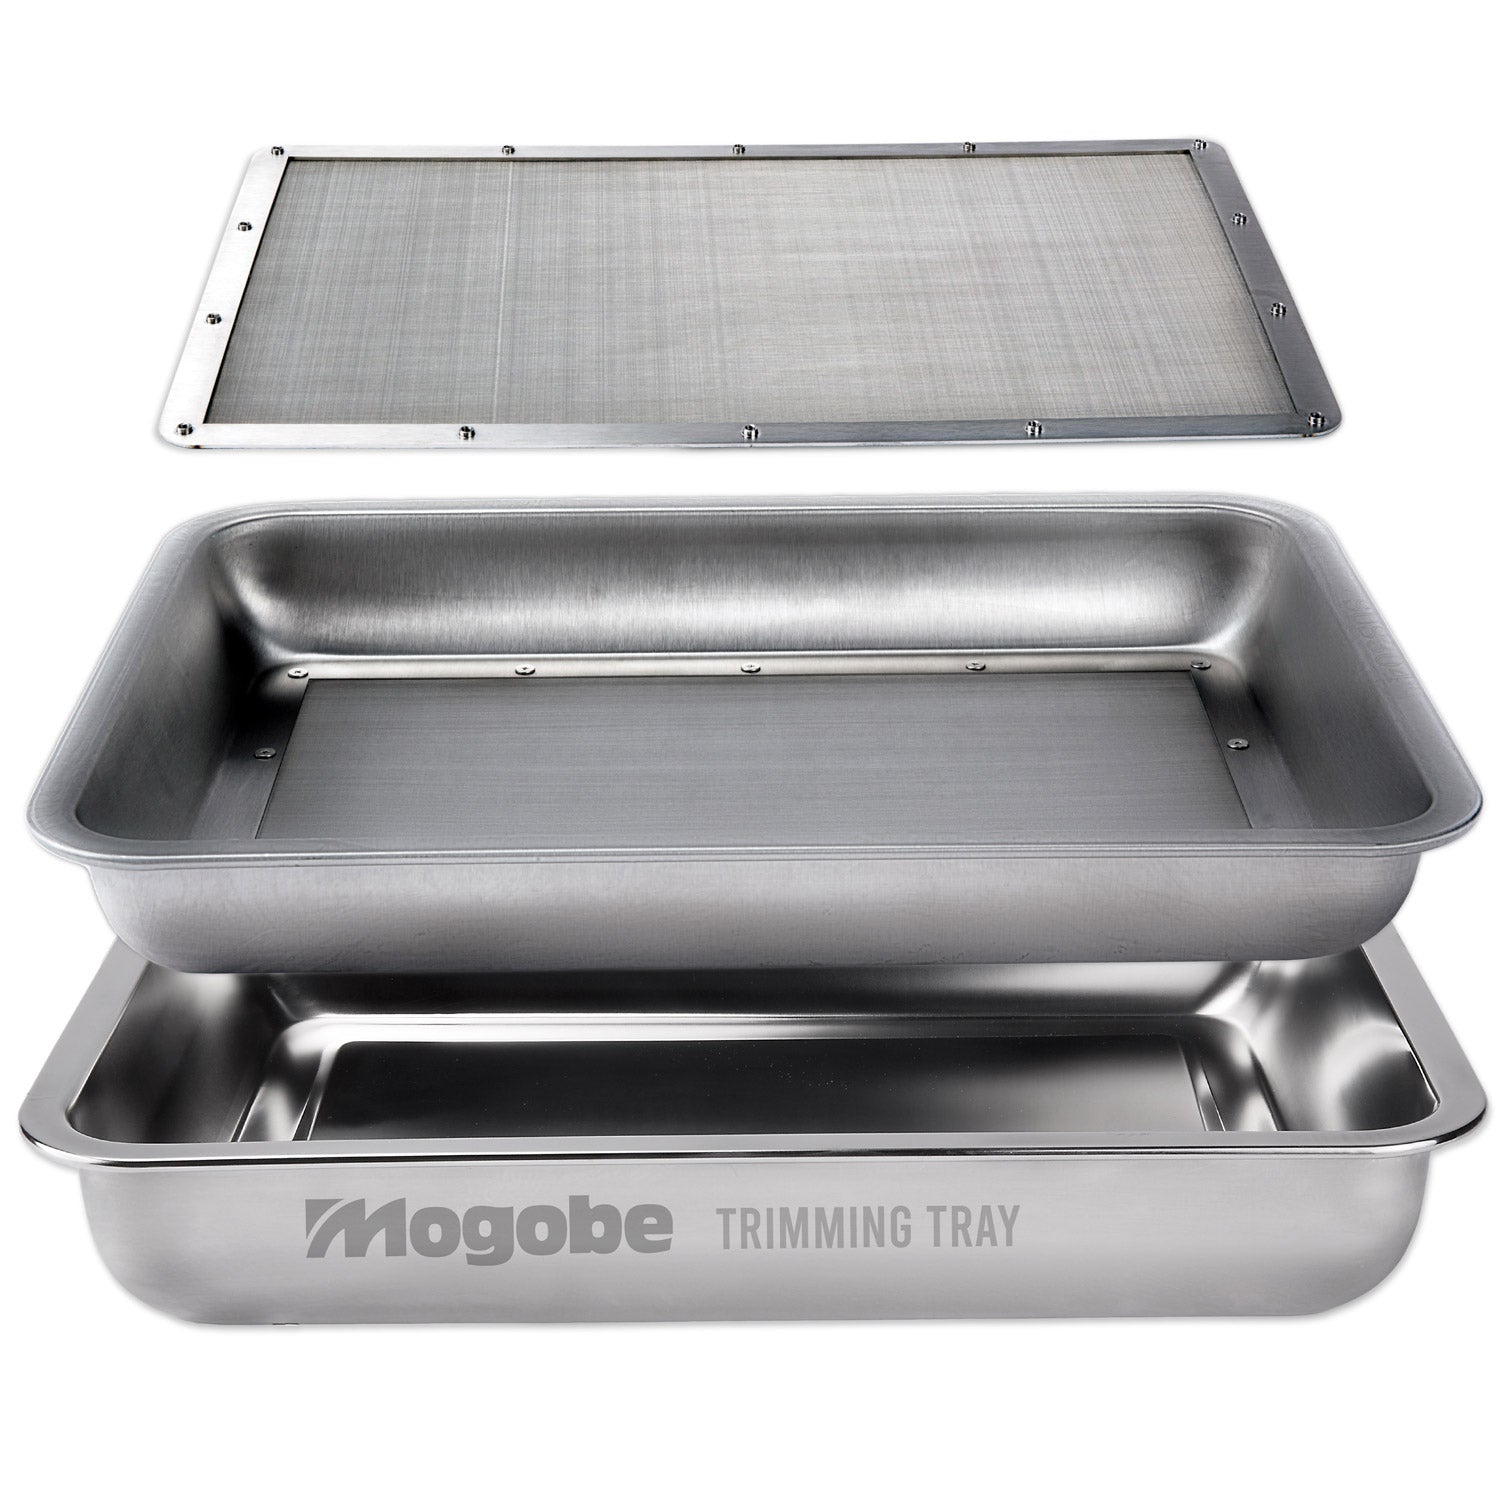 Mogobe Trim Tray, Made of Stainless Steel with a Detachable 150 Micron –